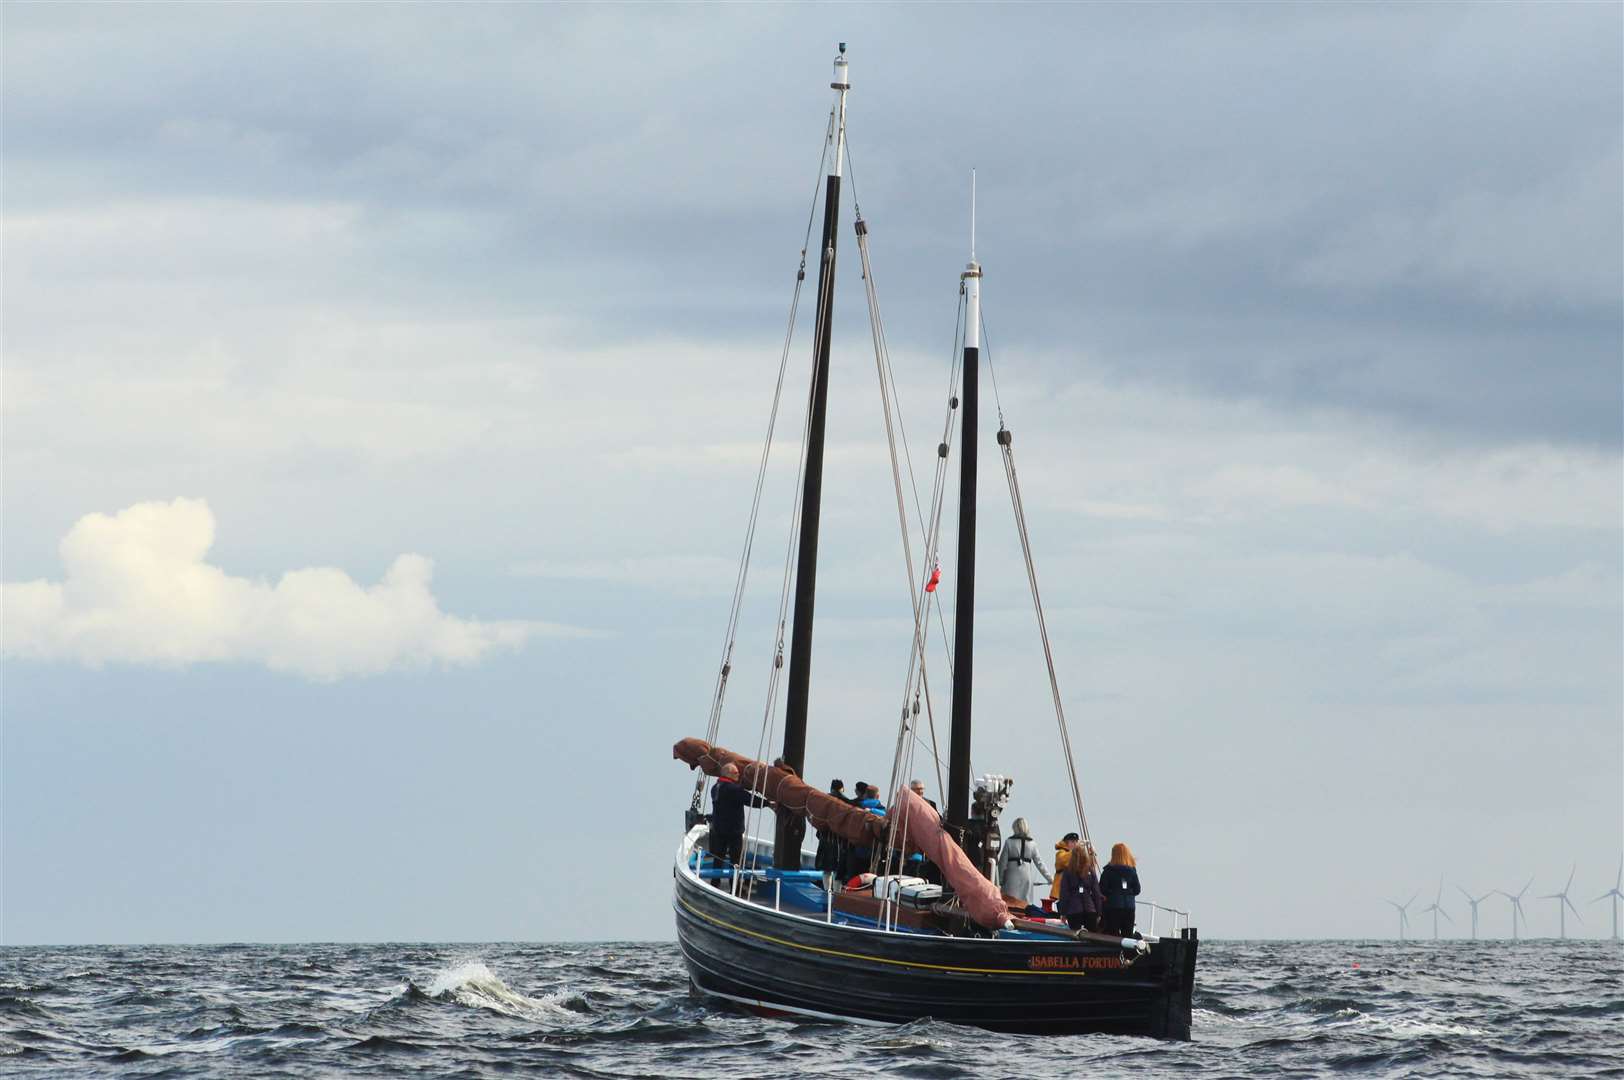 The Wick Society's Isabella Fortuna heading out to the bay for the start of the service. Picture: Alan Hendry